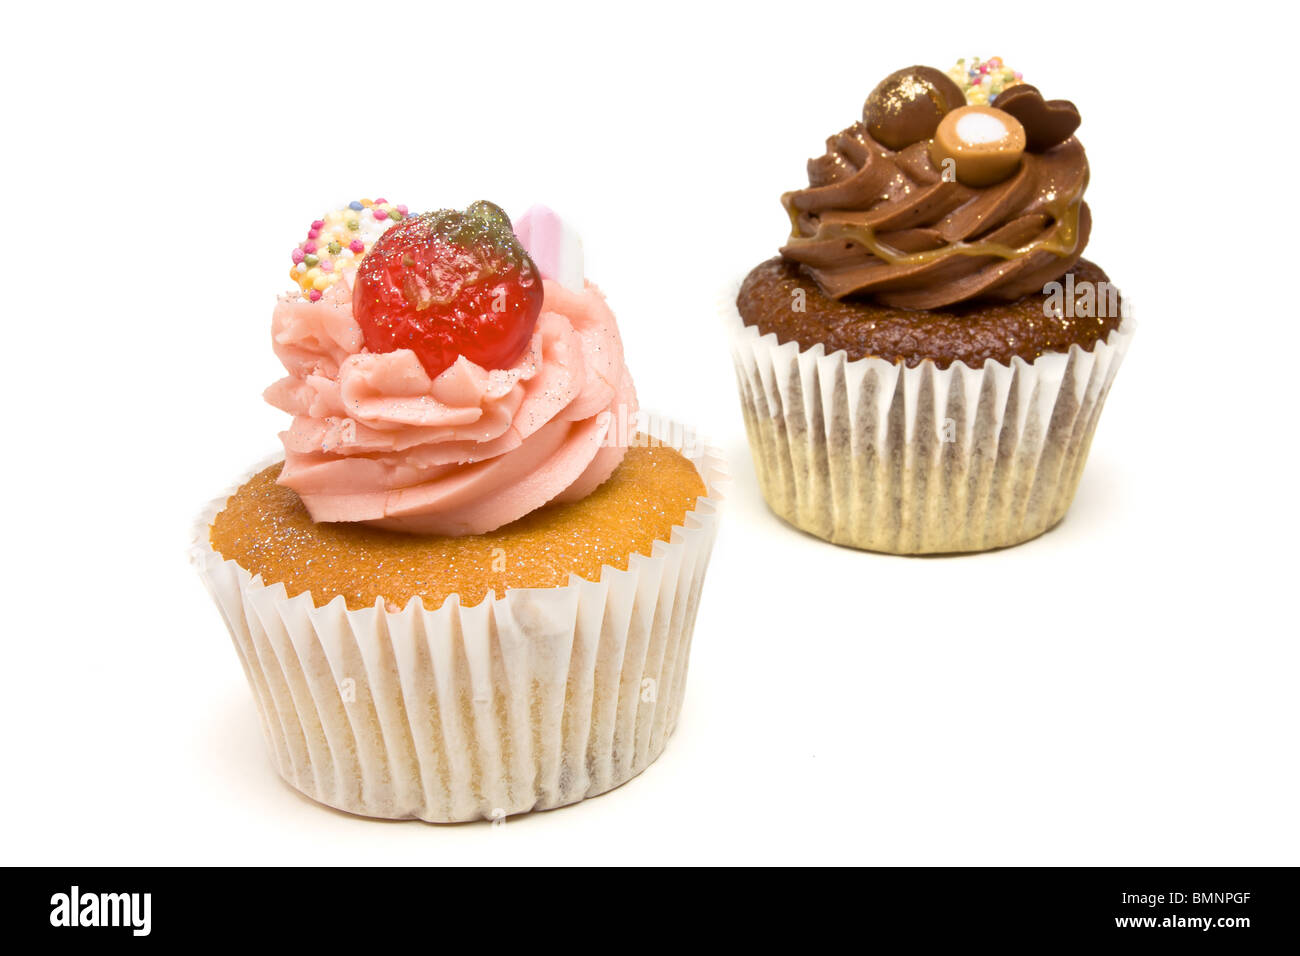 Luxury Strawberry and Chocolate Cup Cakes from low perspective isolated against white background. Stock Photo